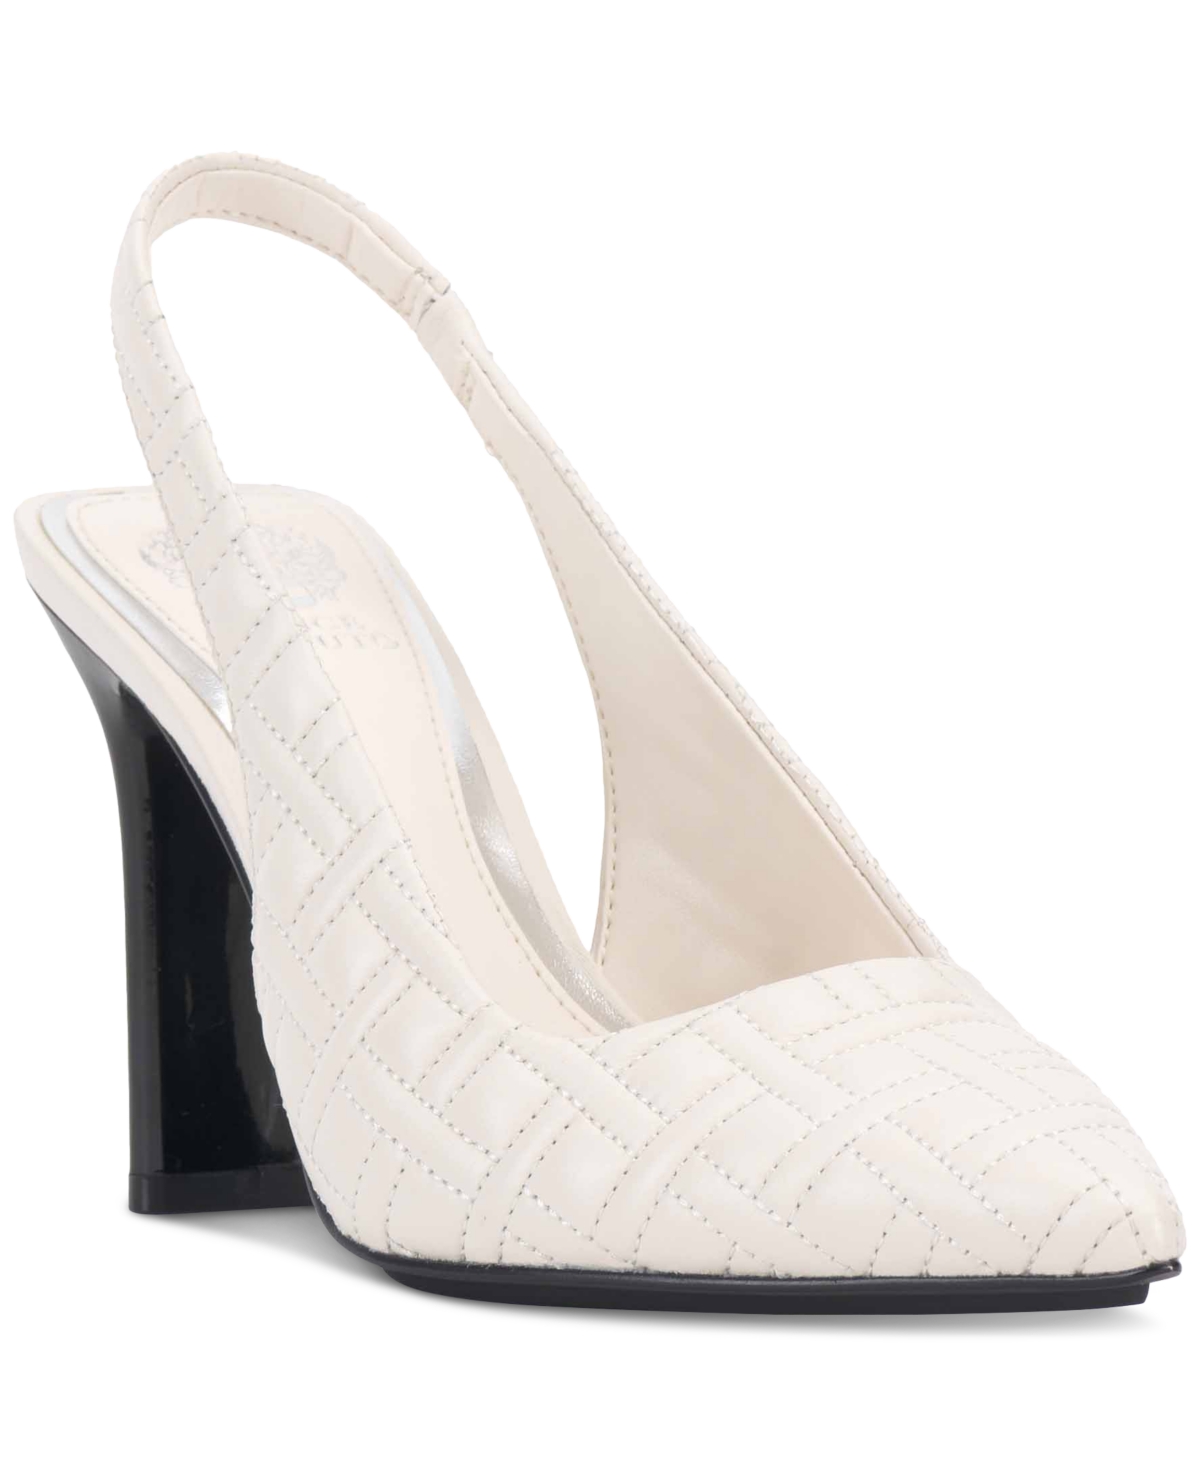 Shop Vince Camuto Women's Baneet Quilted Slingback Pumps In Coconut Cream Leather